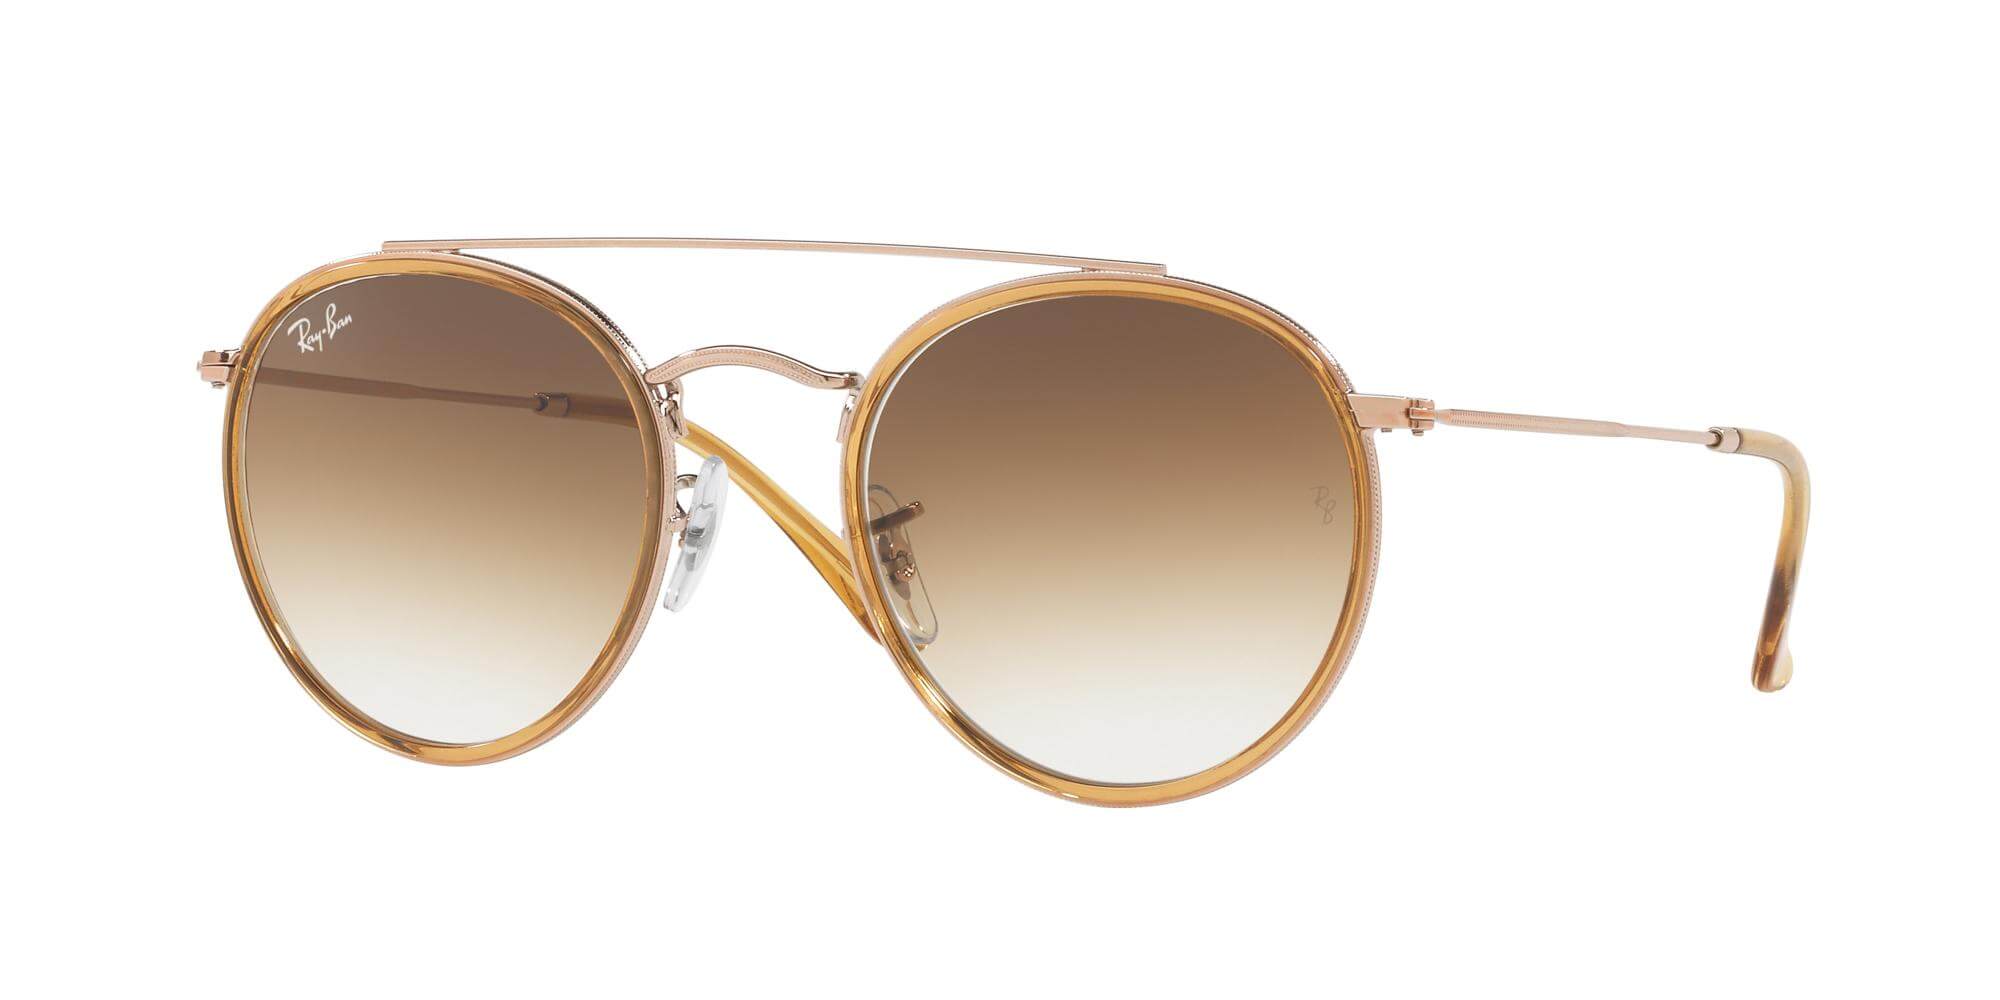 Ray-BanDOUBLE BRIDGE RB 3647NRose Gold/light Brown Shaded (9070/51)